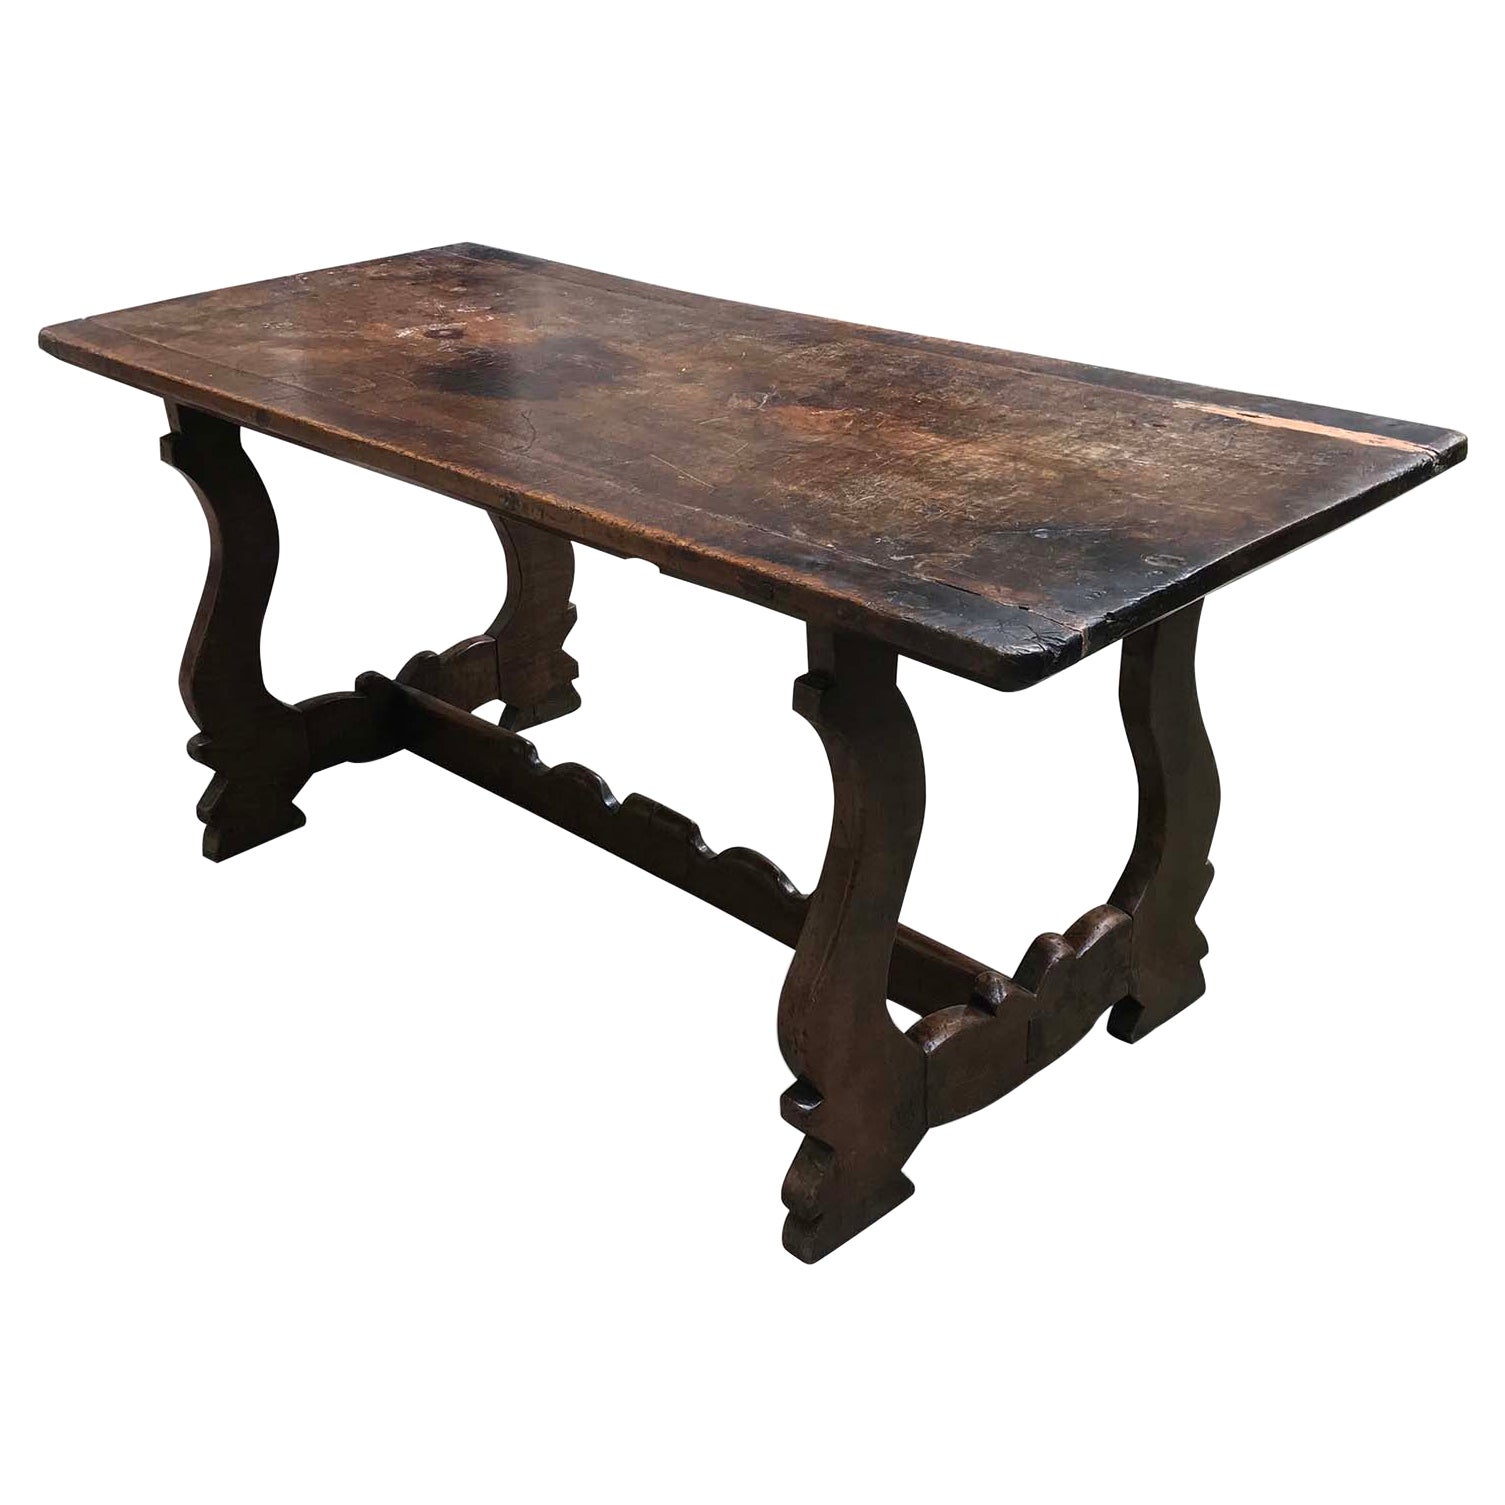 18th Century Italian Fratino Table with Lyre Legs Solid Walnut Rectangular Table For Sale